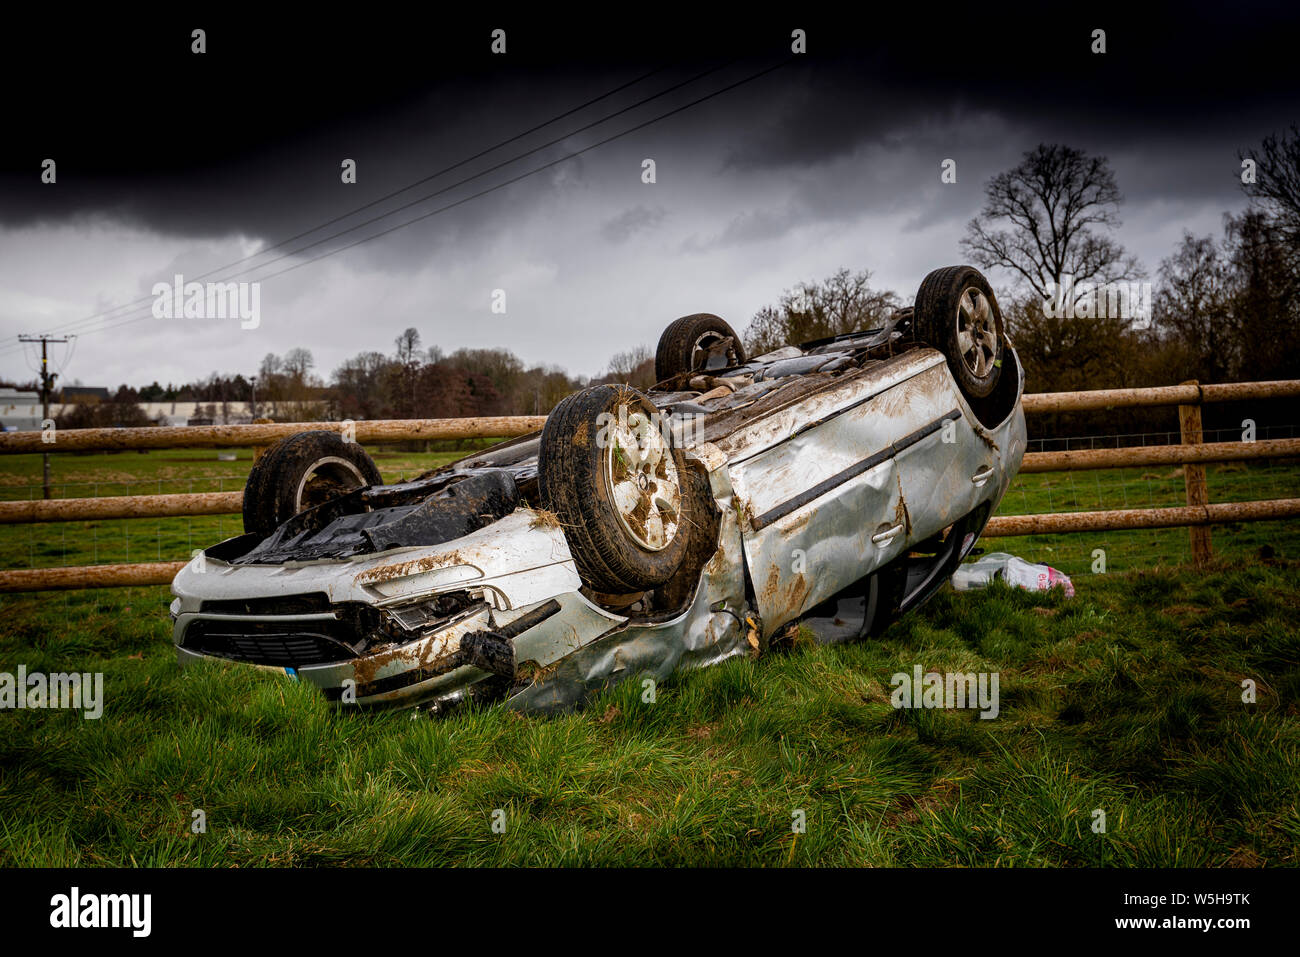 Car crash. Young drivers overturned vehicle. Non fatal accident caused by speeding and rain. Inexperienced driver / Rural crime / Stolen car / rtc. UK Stock Photo